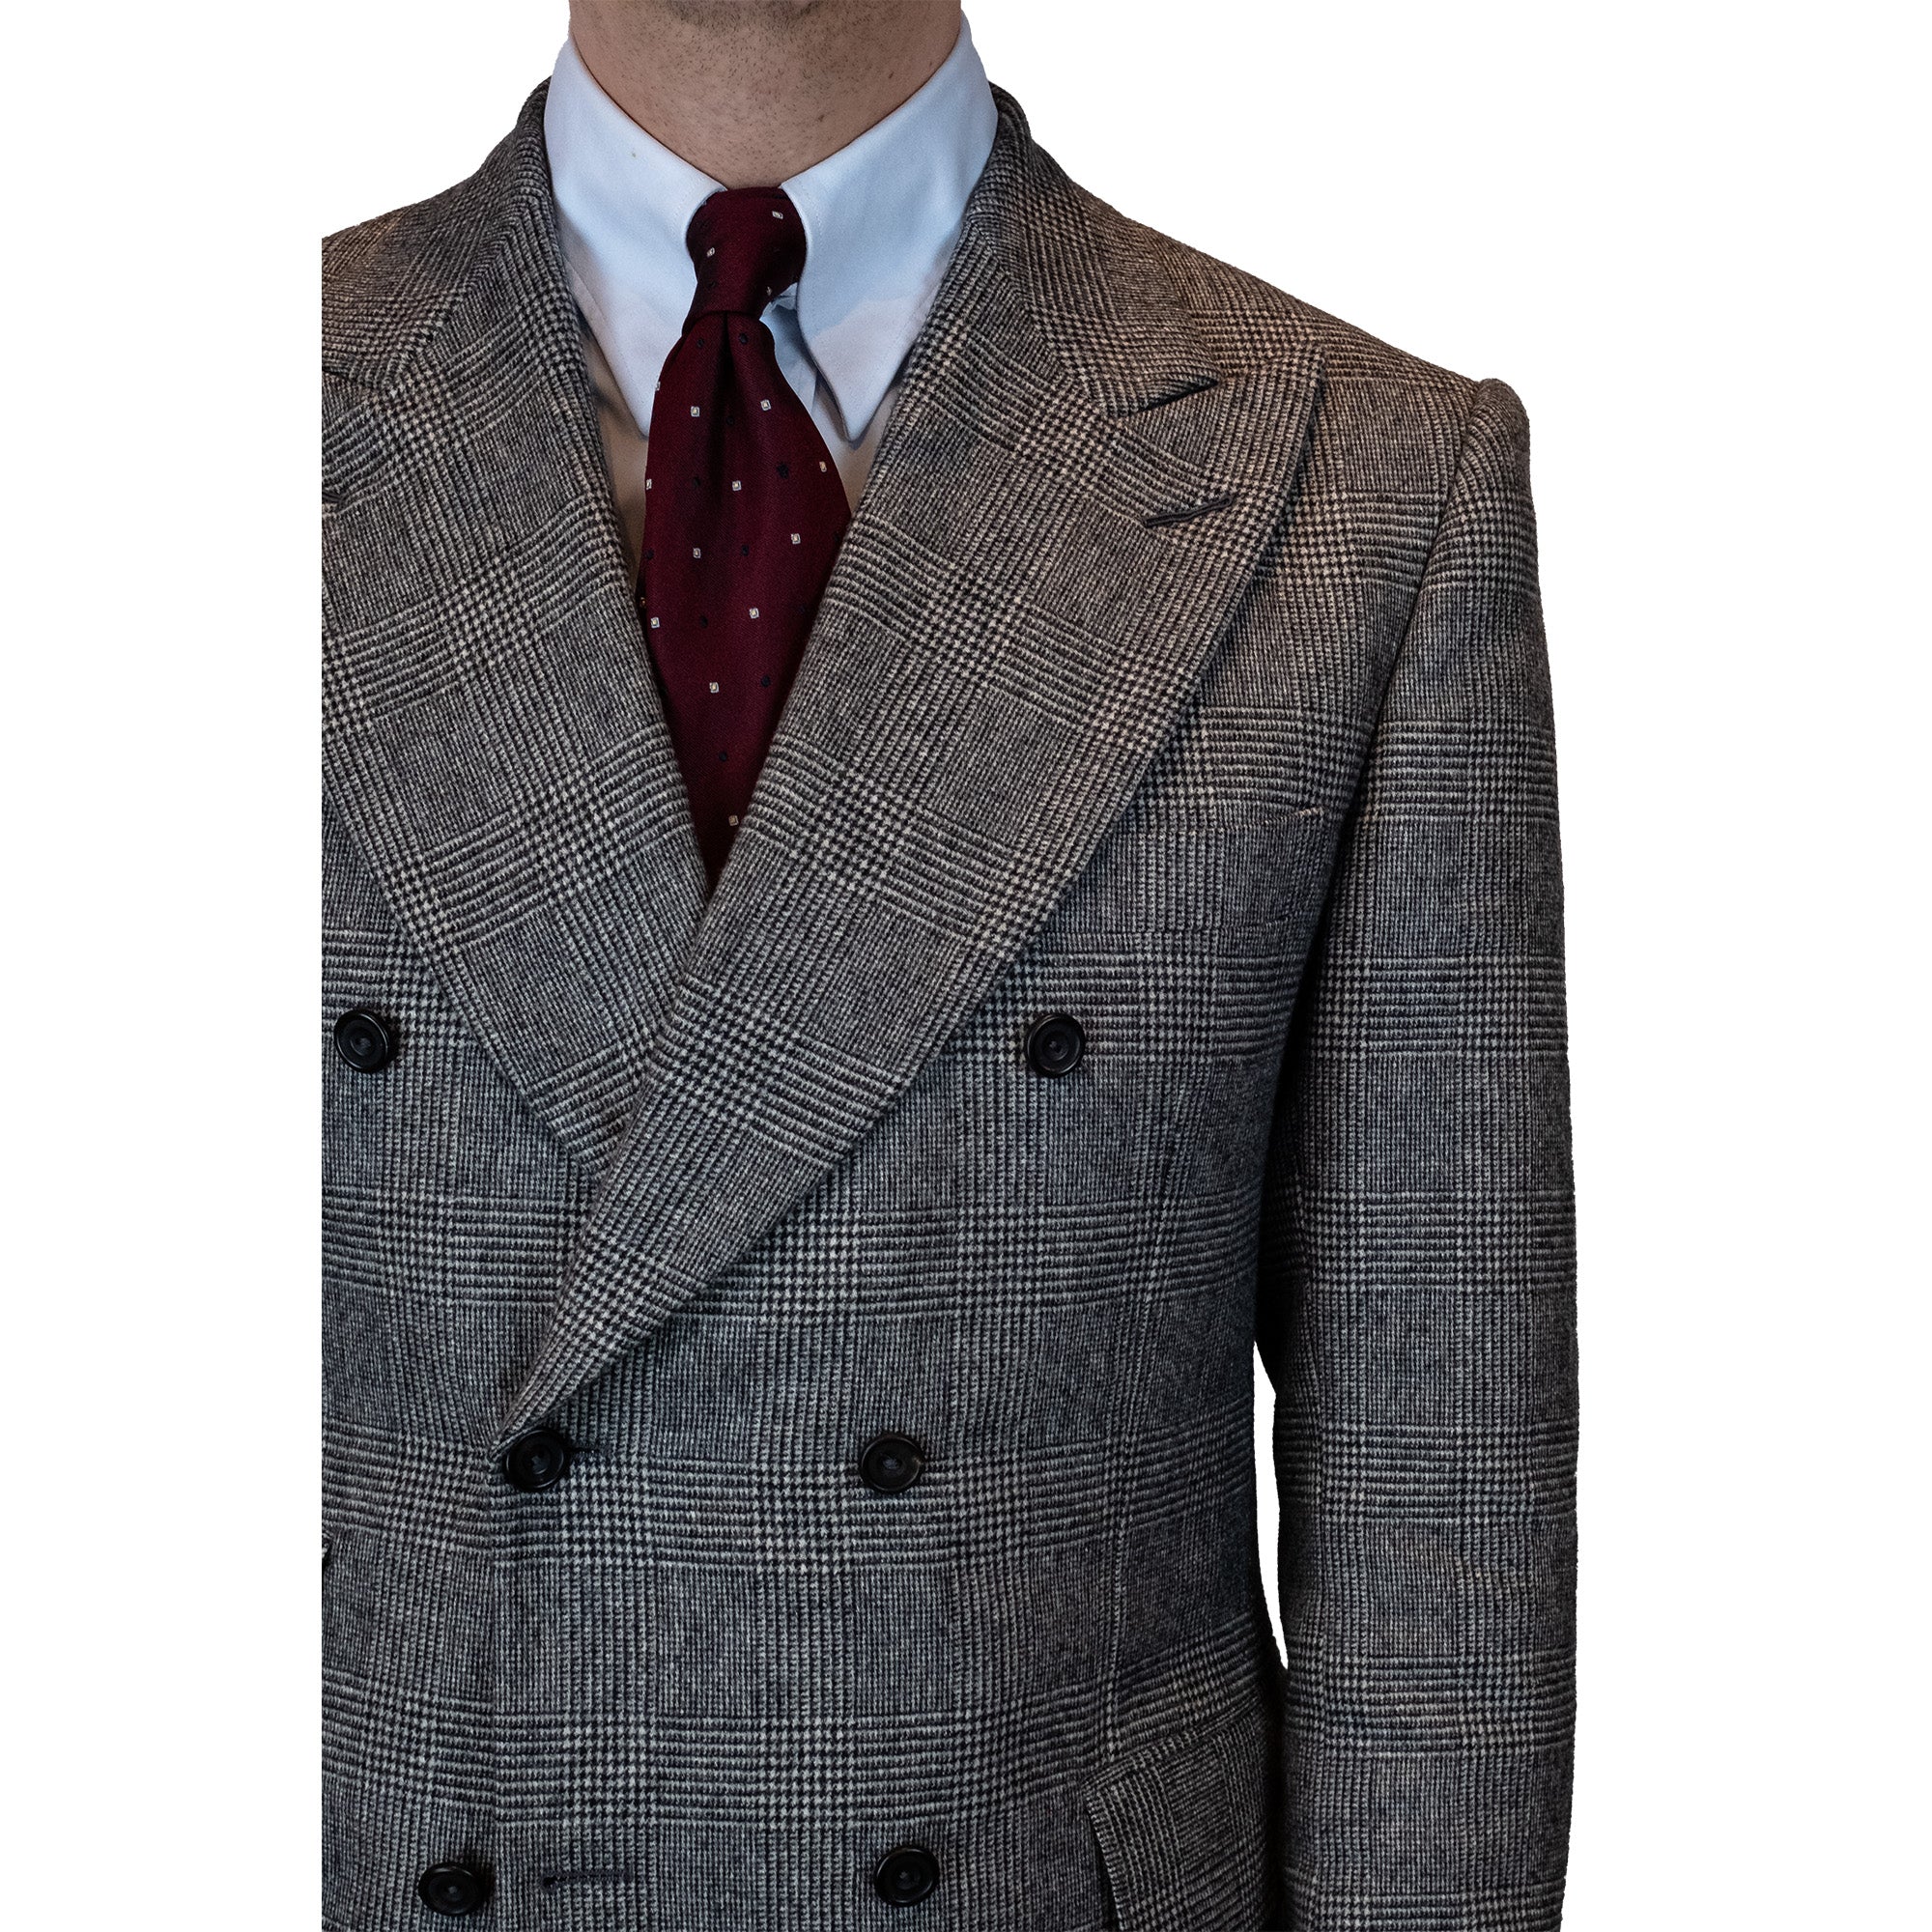 Suit - Black-on-grey Glencheck by Fox Brothers